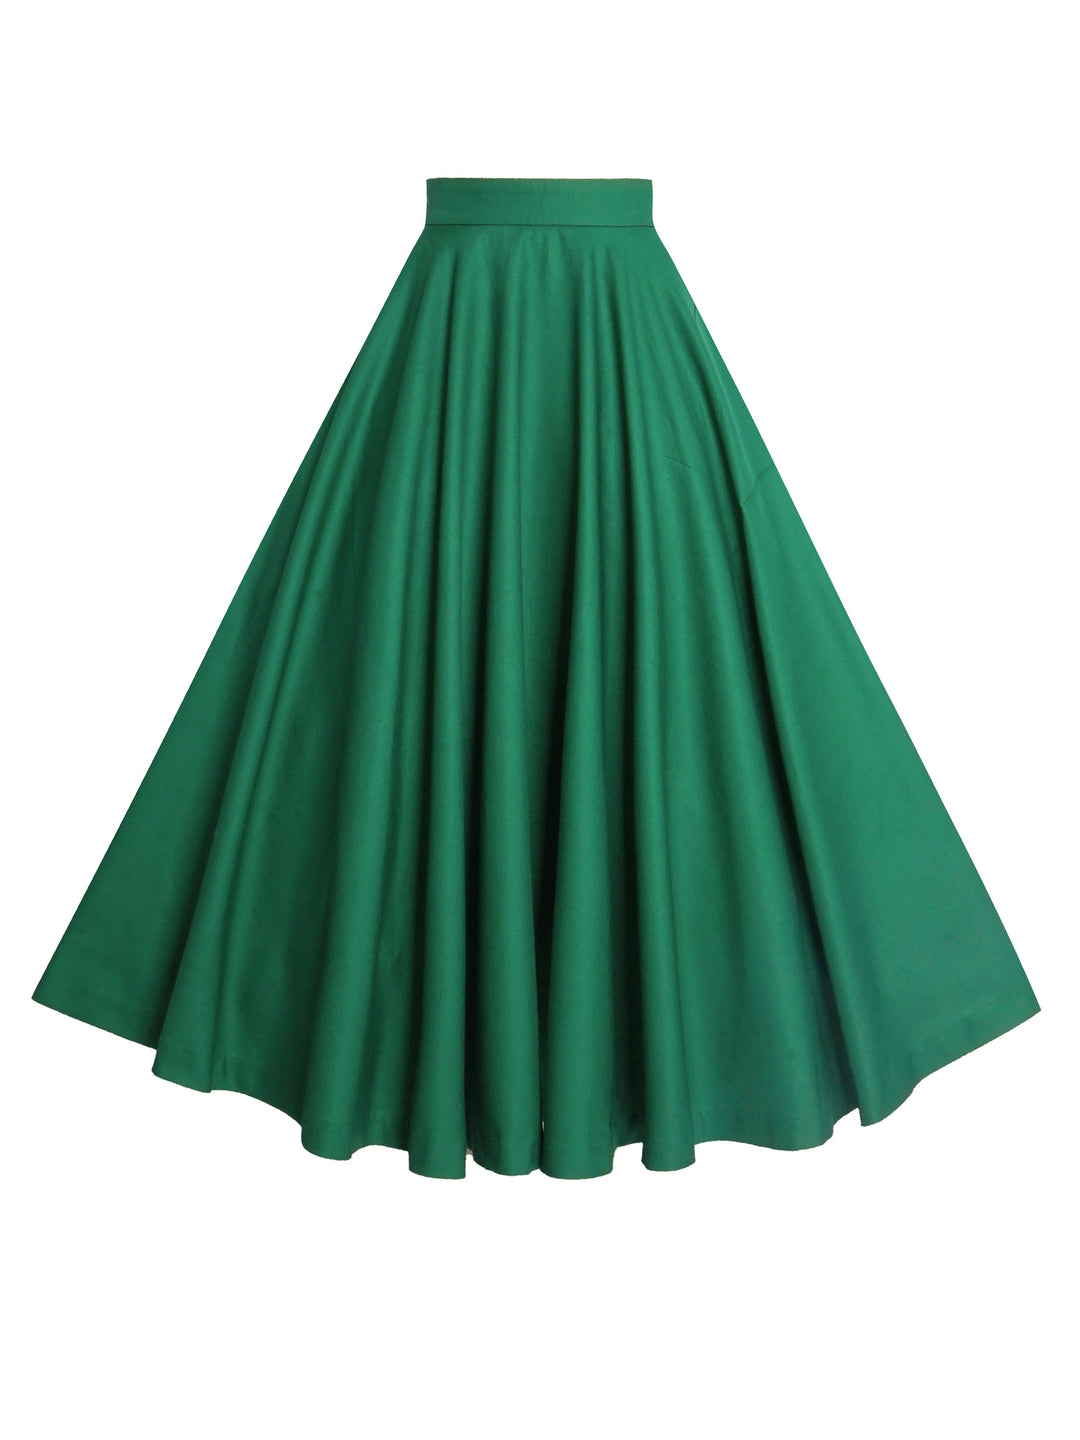 RTS - Size XL - Lindy Skirt in Pine Green Cotton